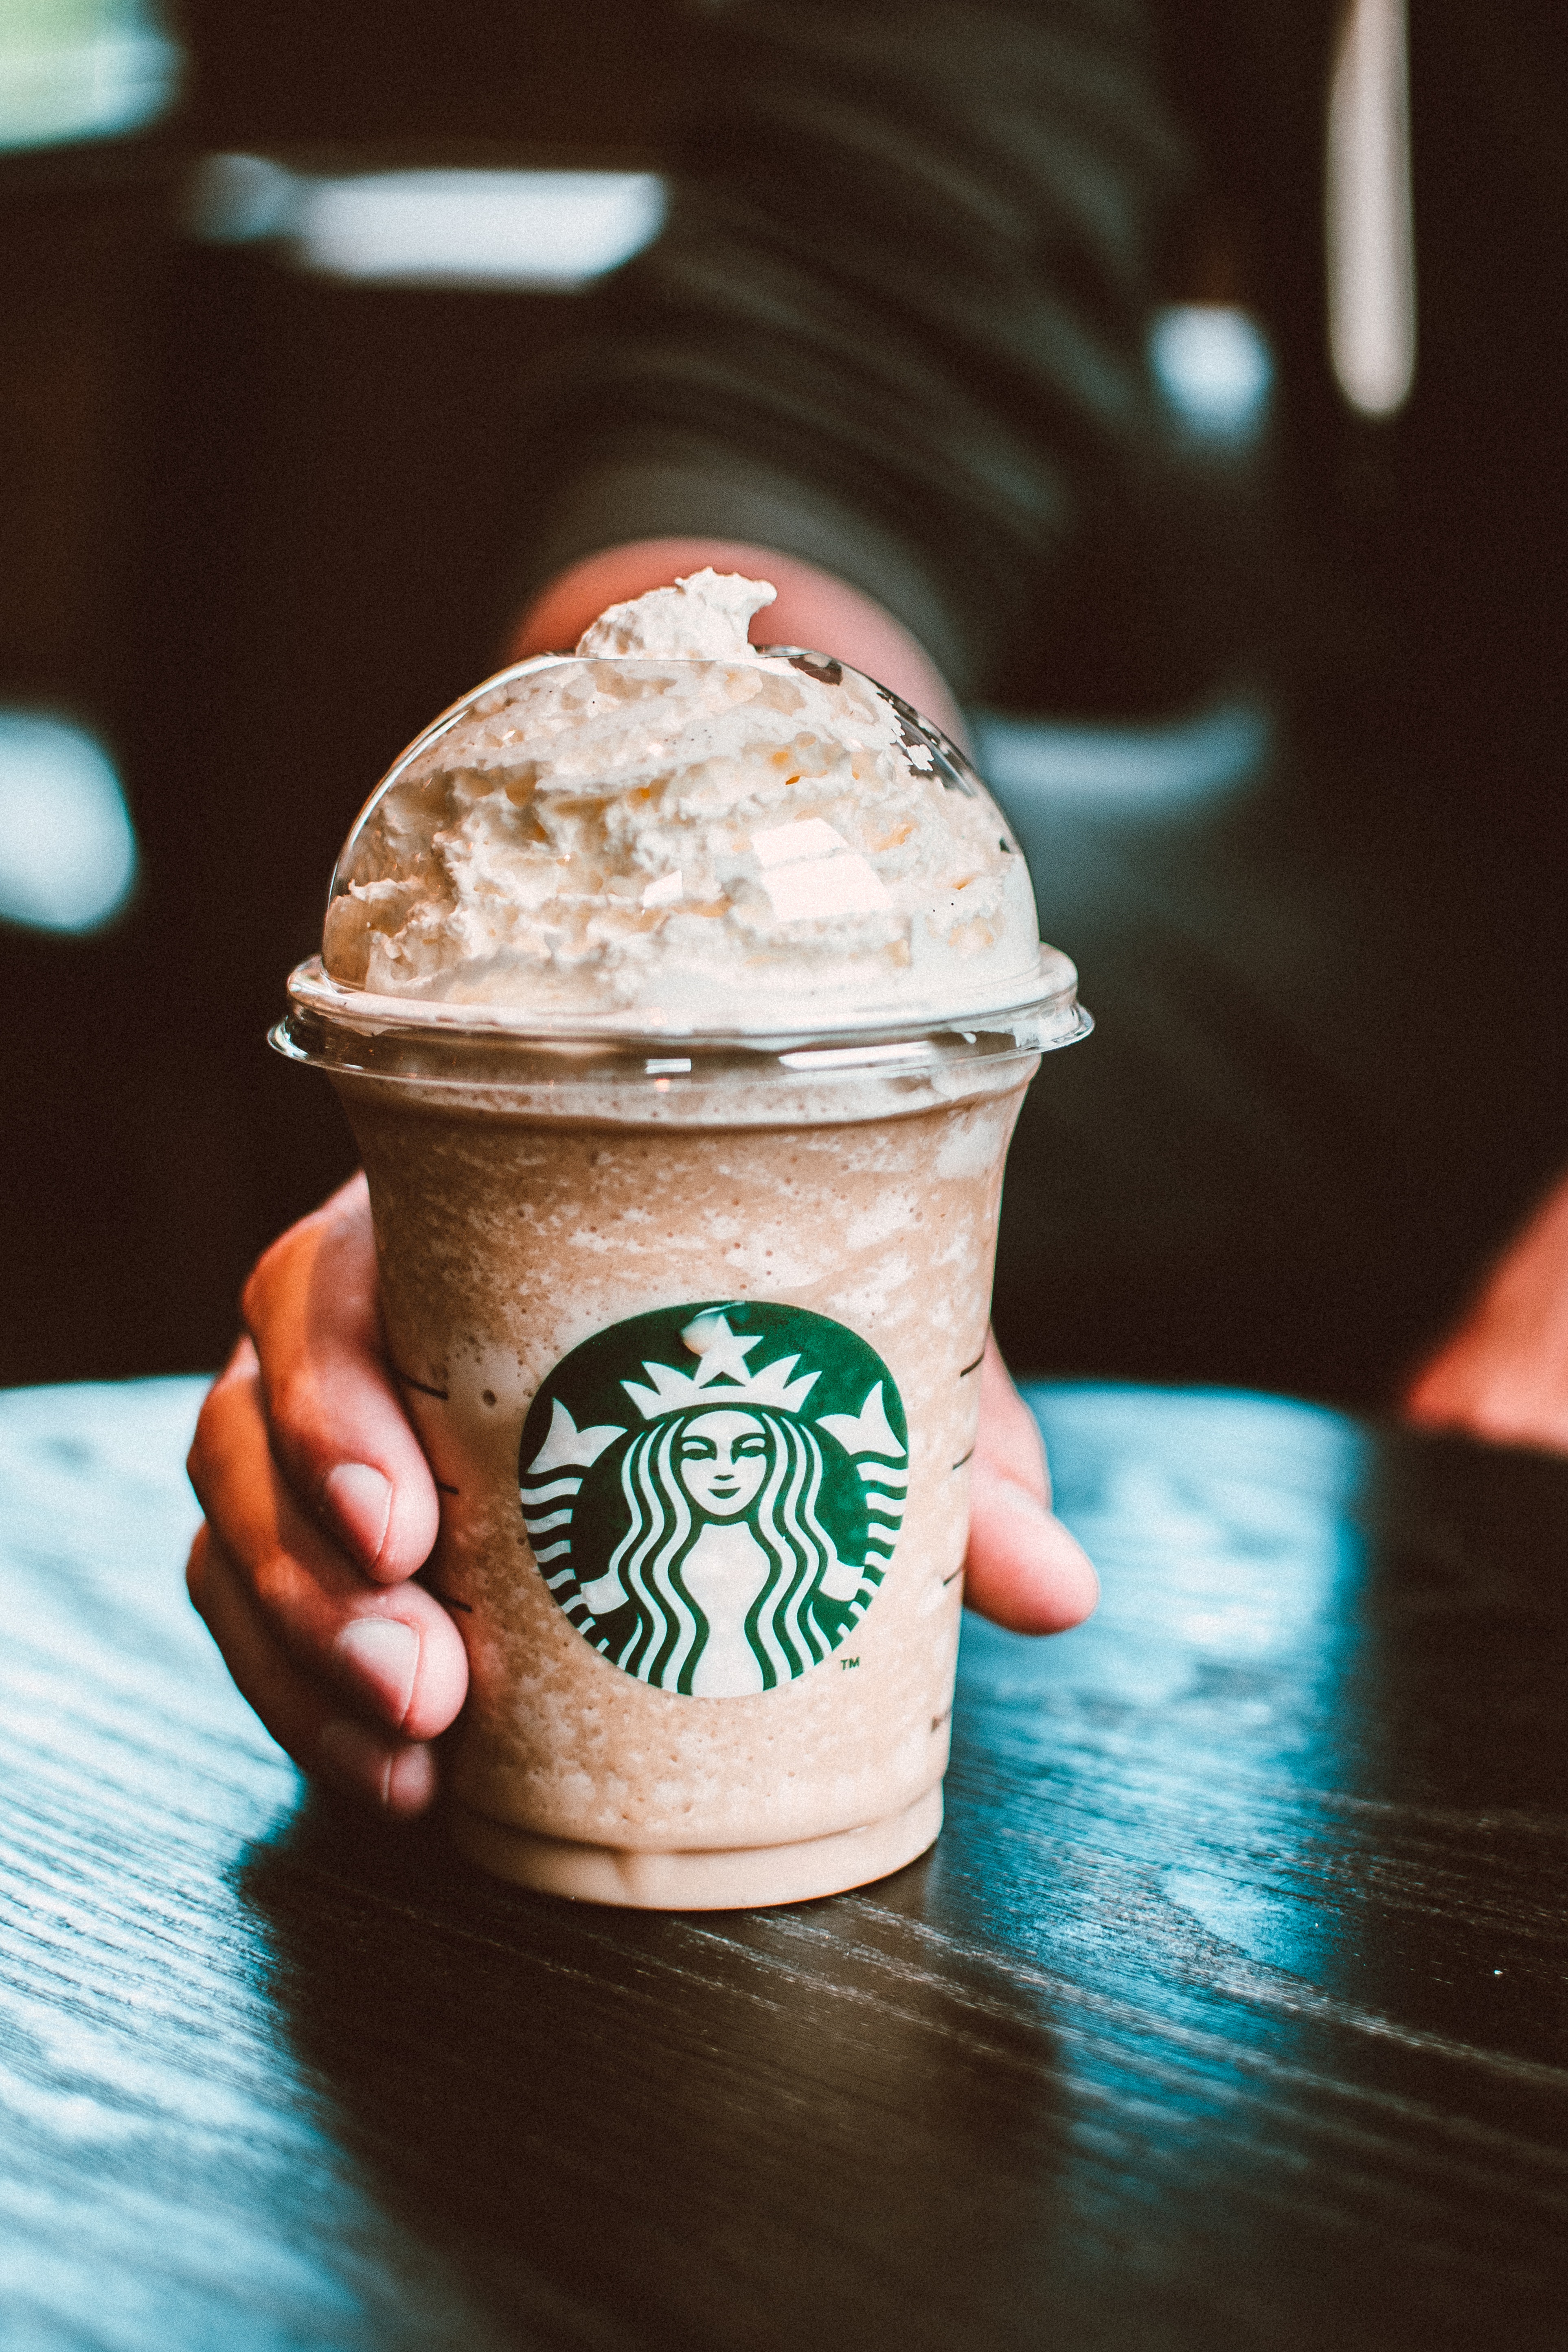 Holding a Starbucks cup | Source: Pexels